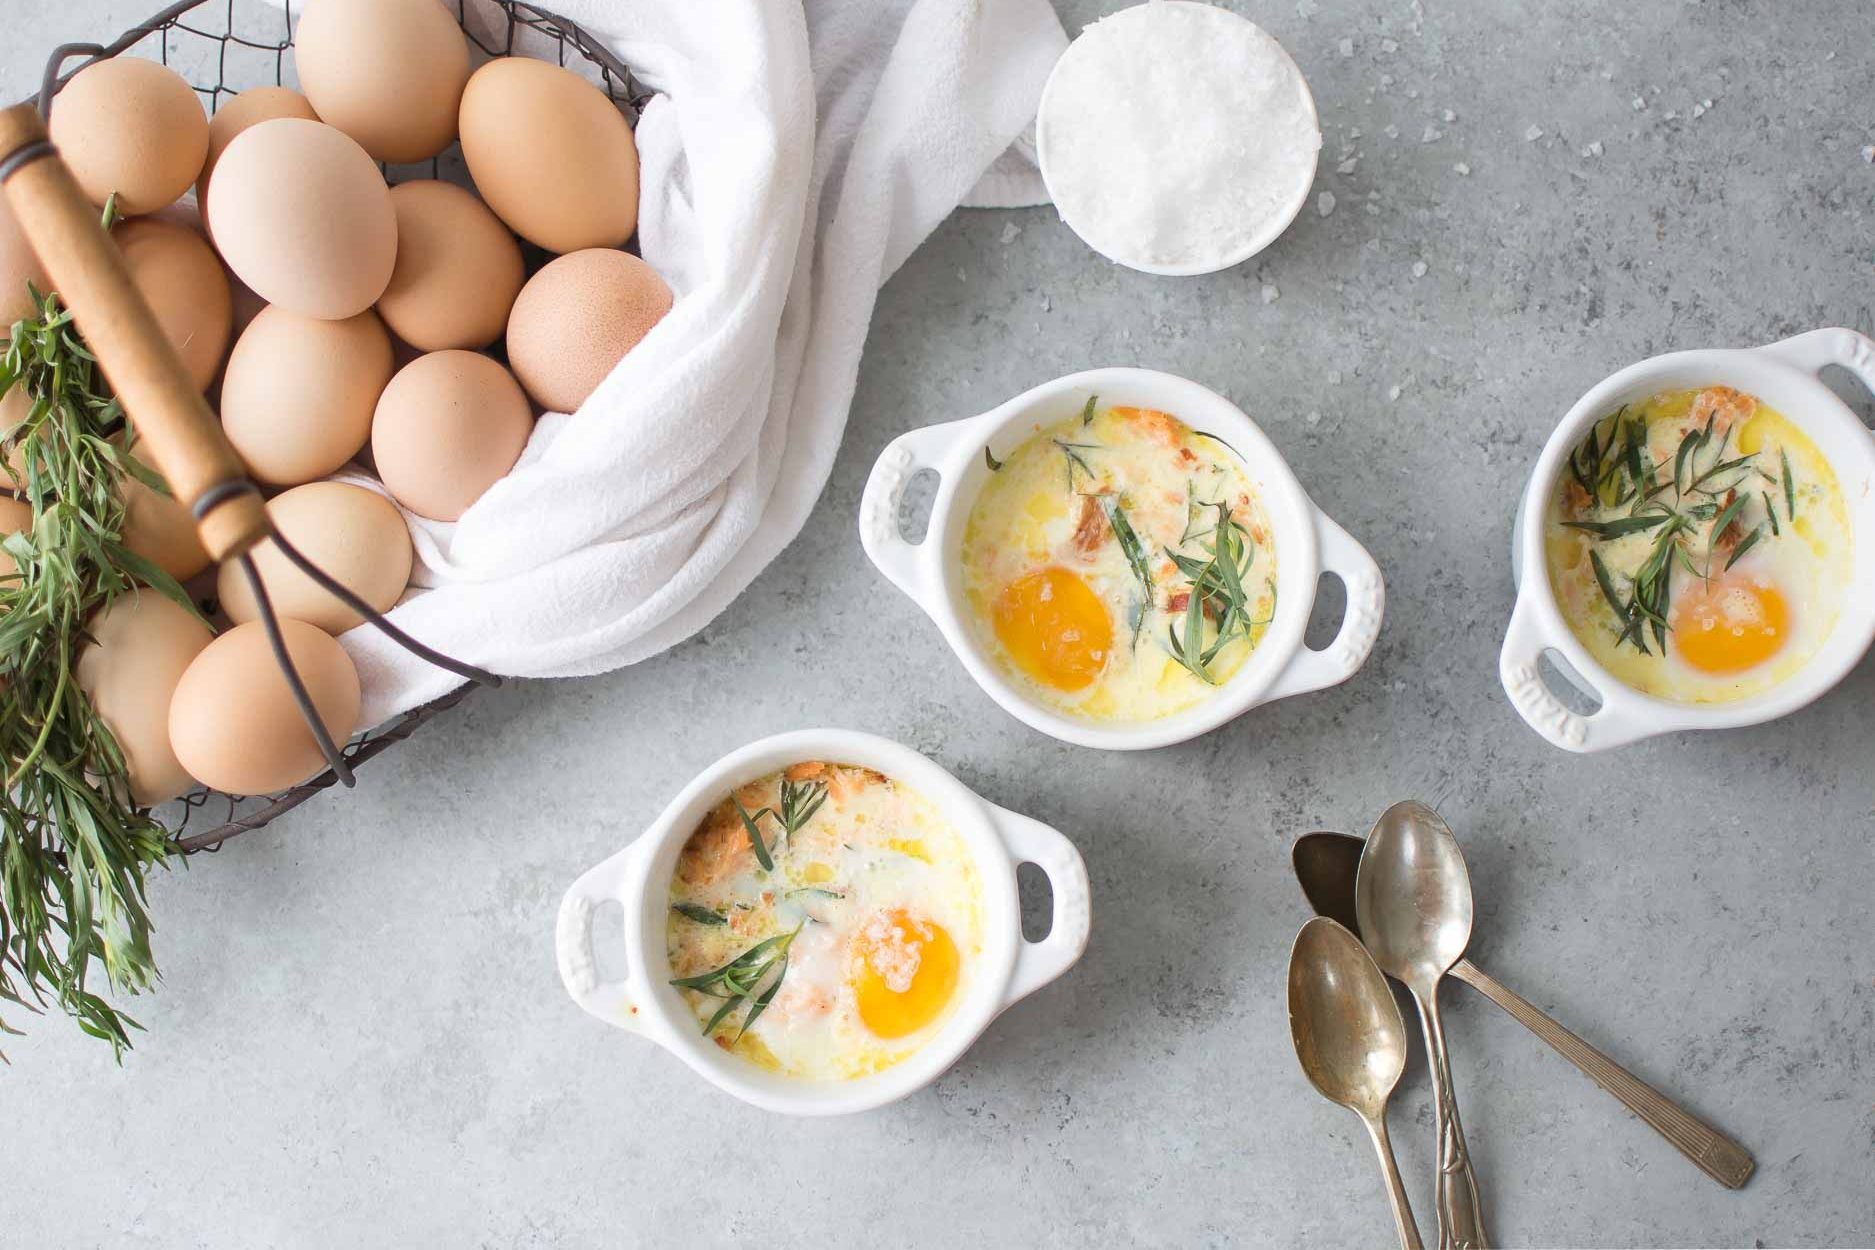 Baked Eggs with Smoked Salmon and Tarragon is SO easy to make, and super nutrient-dense.